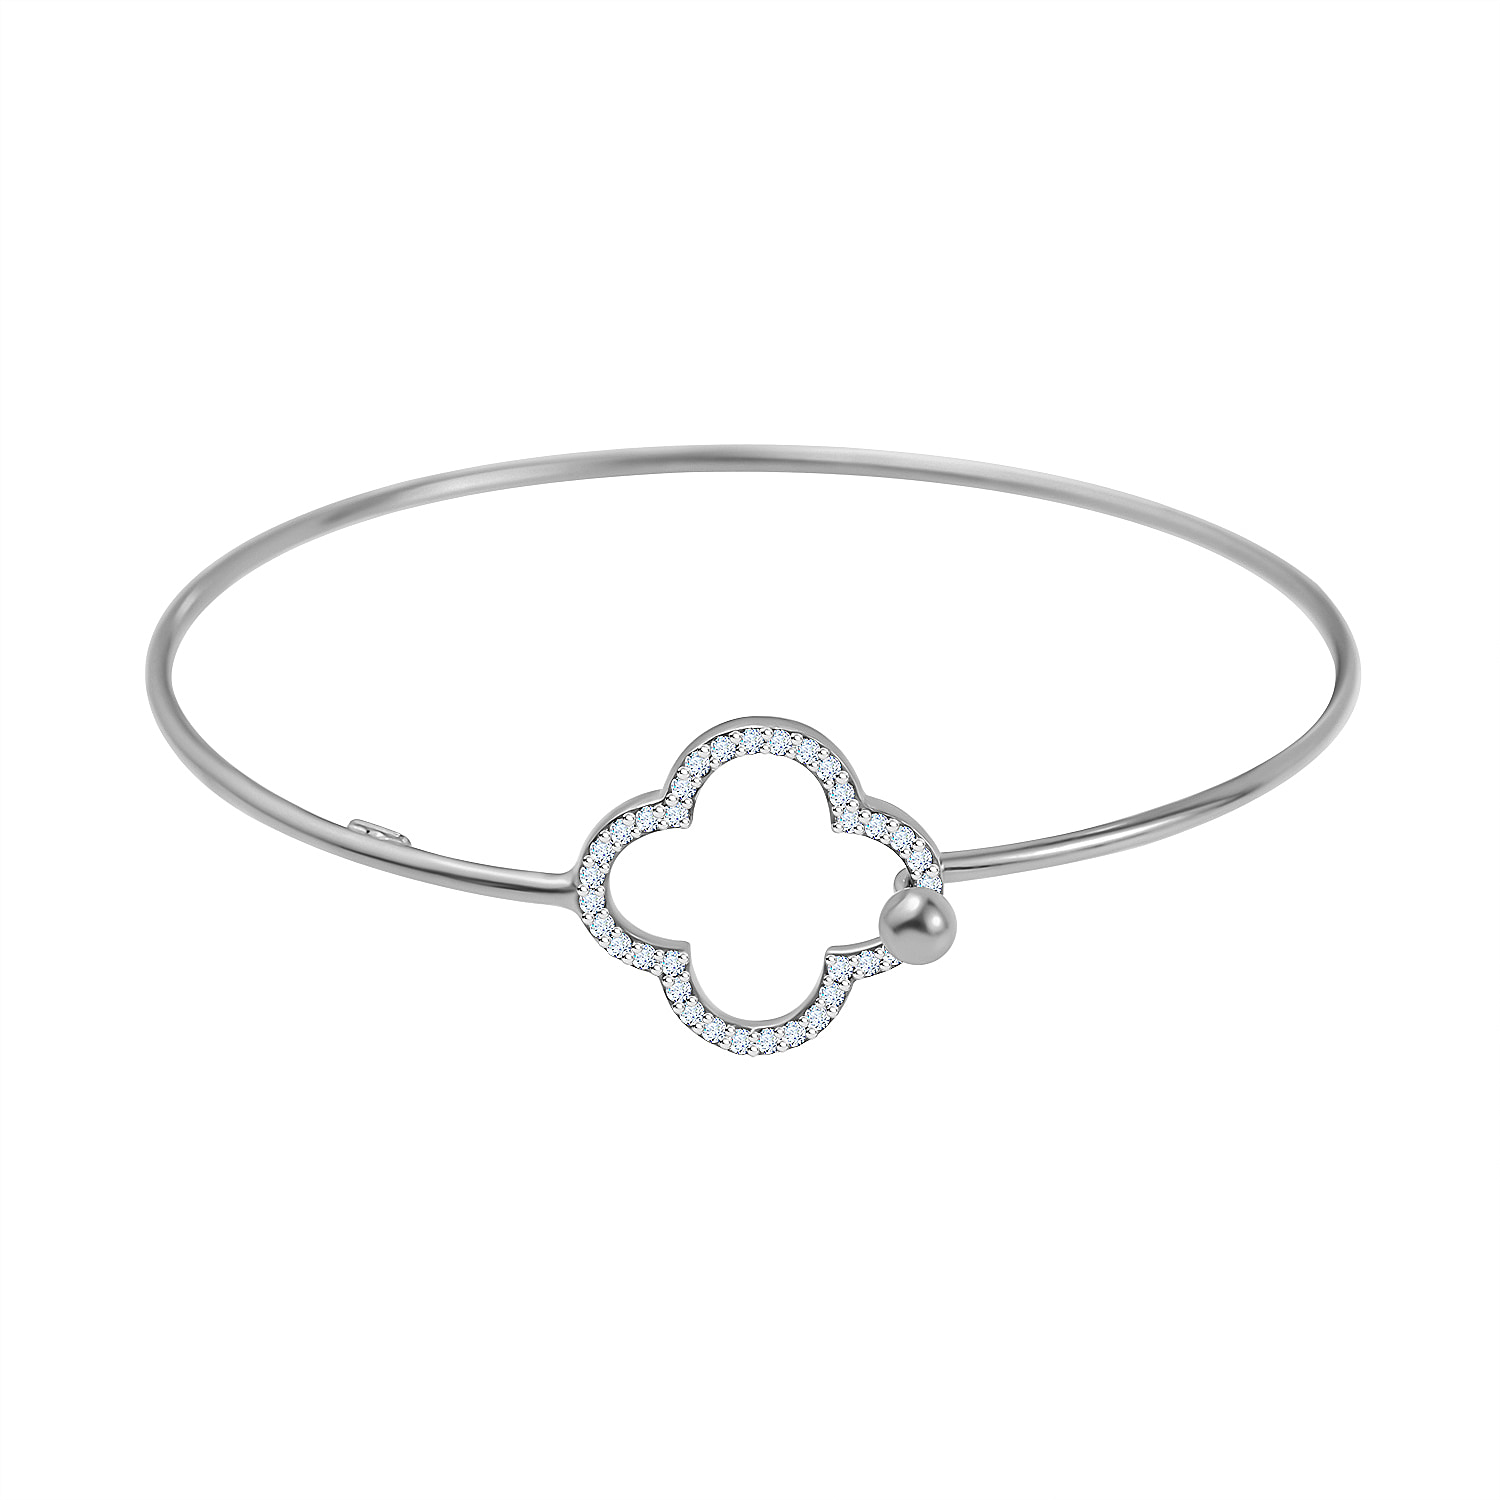 NY Closeout - Zirconia Clover Bangle in Platinum Overlay Sterling Silver (Size - 7.5)